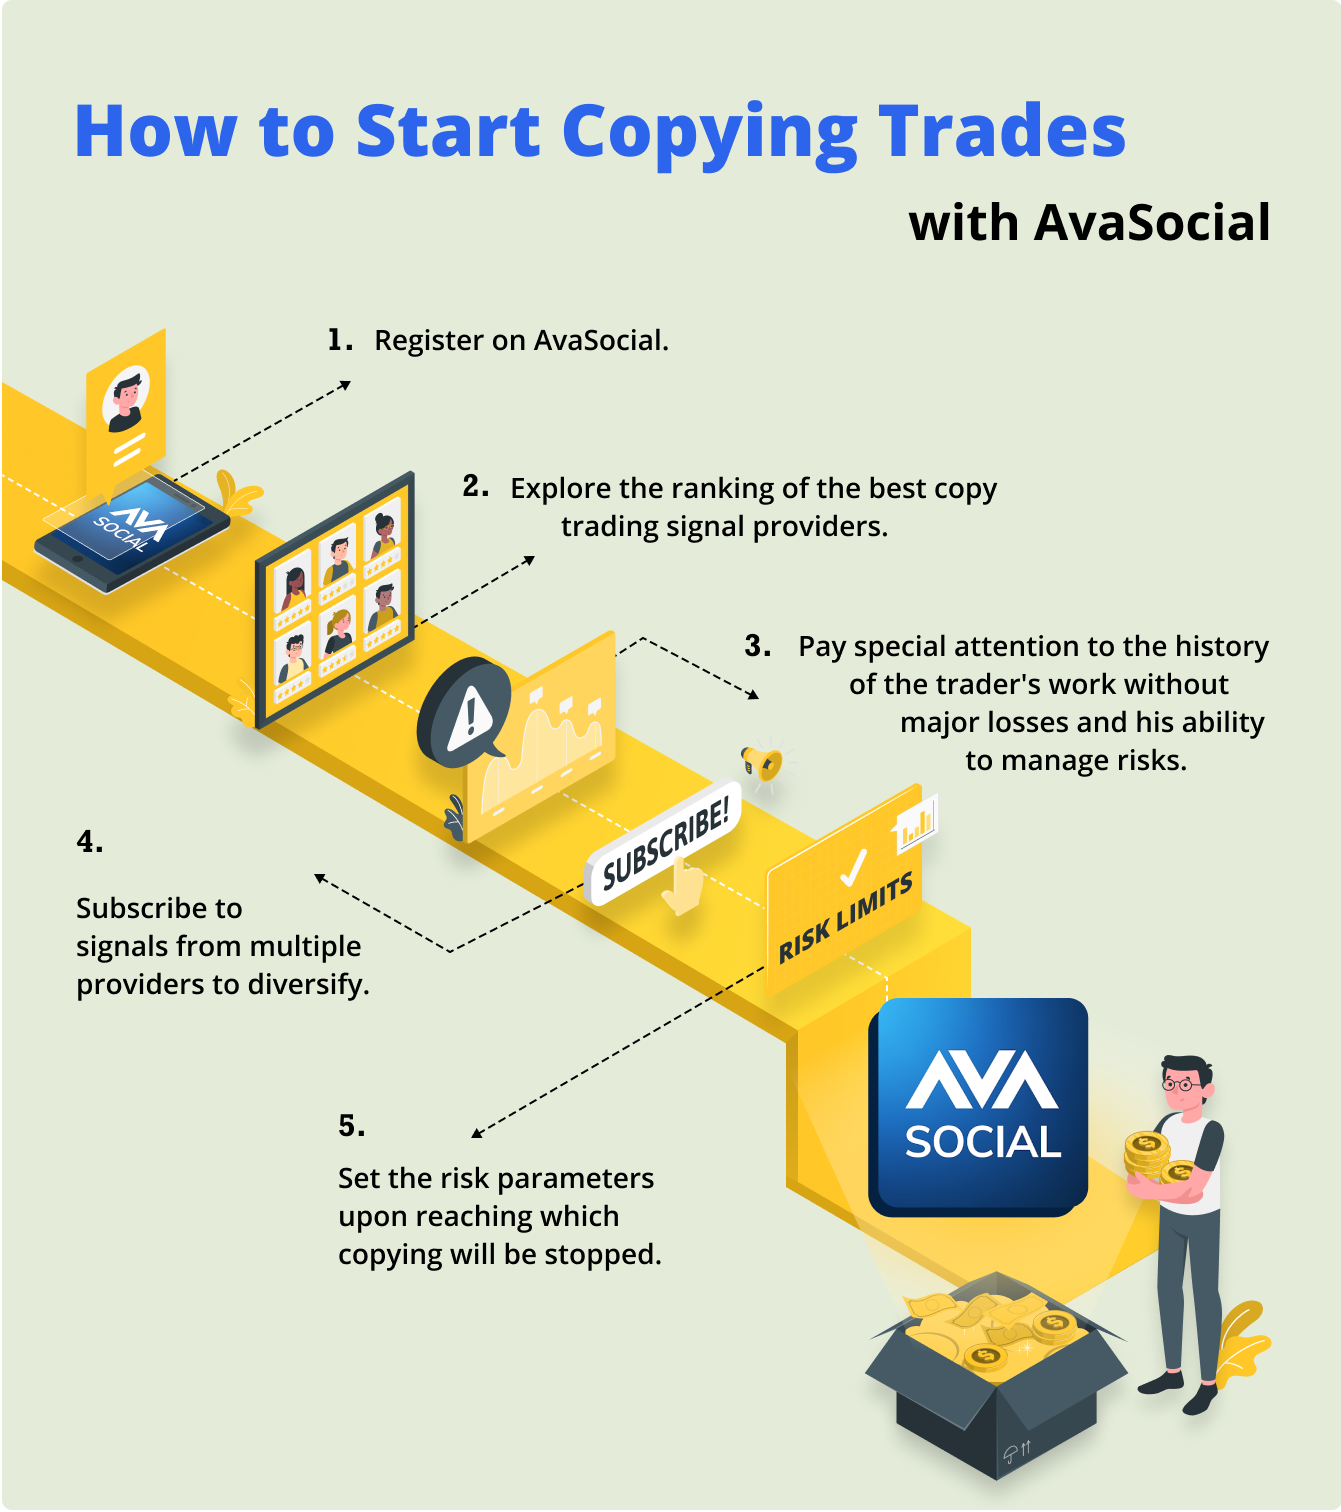 How to Start Copying Trades with AvaSocial